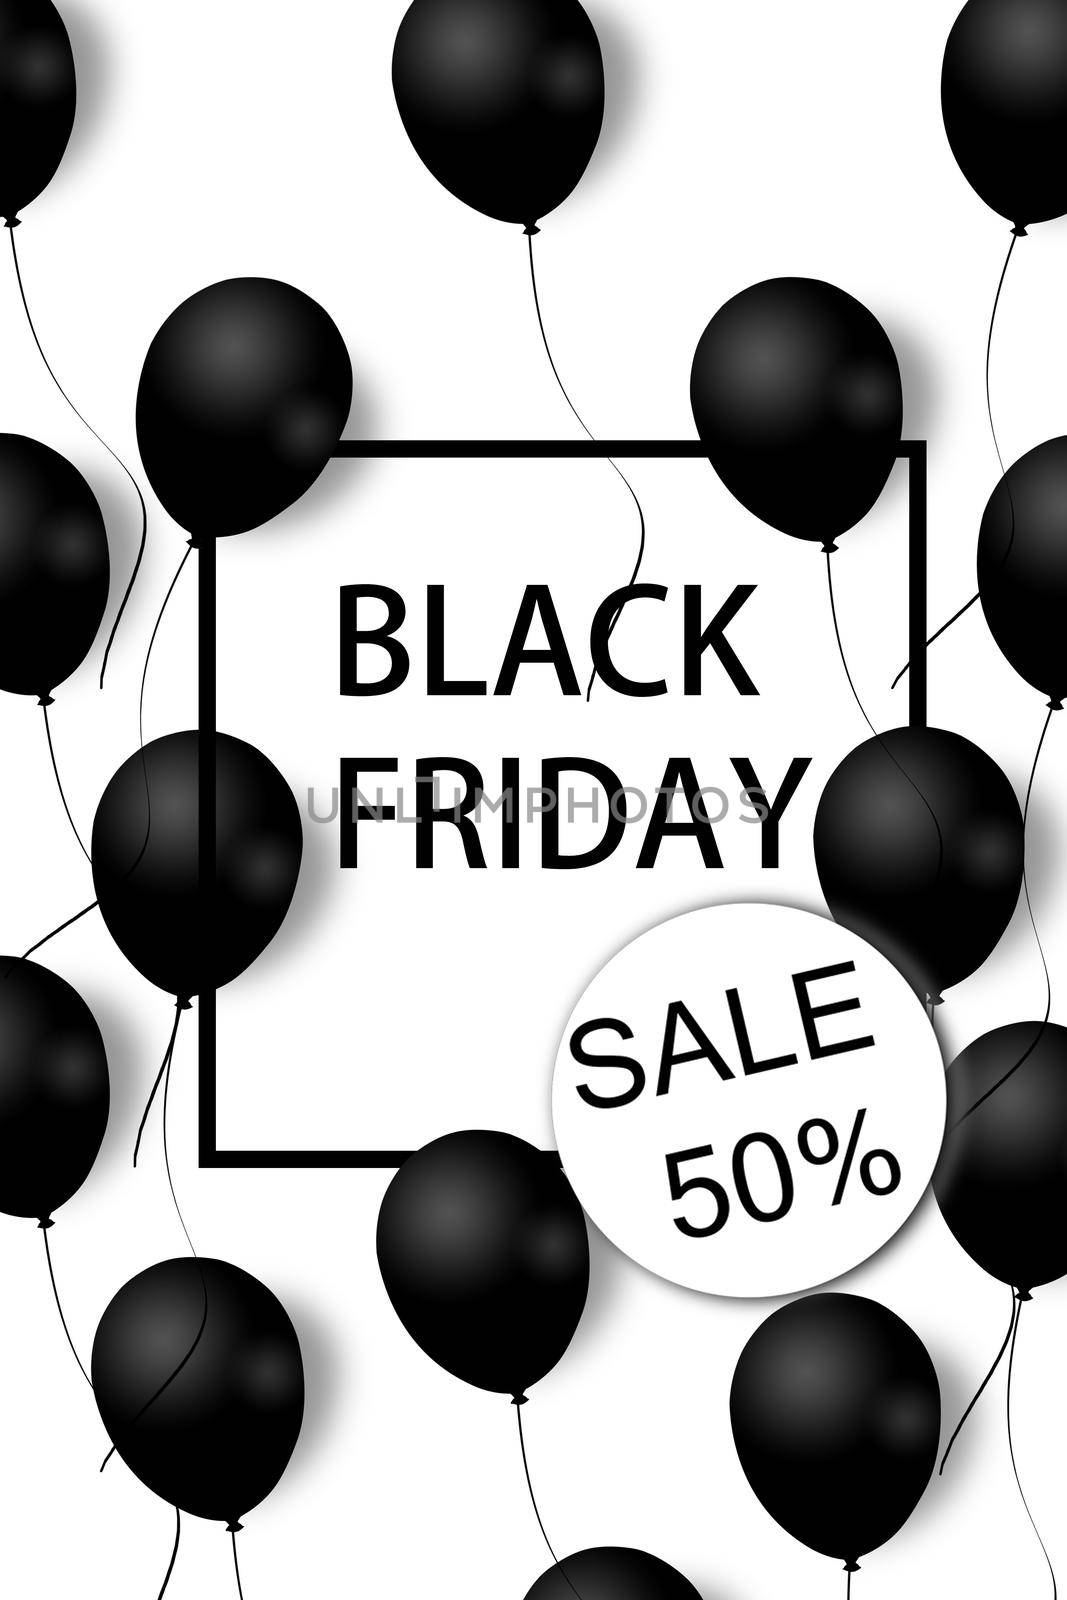 Black Friday Sale Poster with black balloons on white background with square frame. Illustration. by nazarovsergey